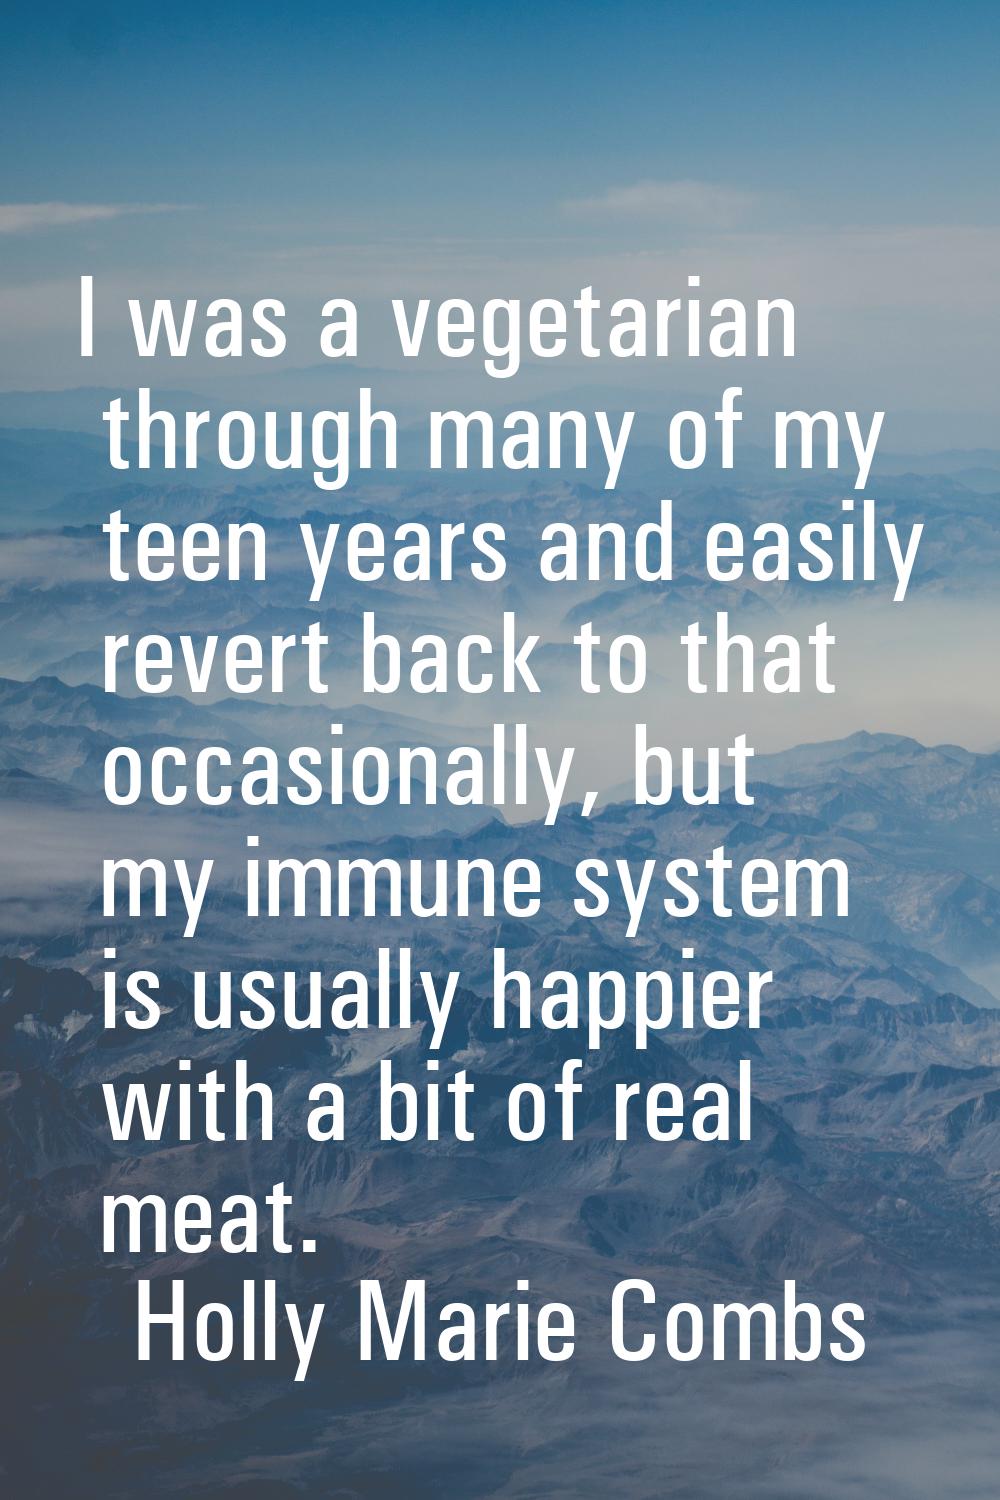 I was a vegetarian through many of my teen years and easily revert back to that occasionally, but m